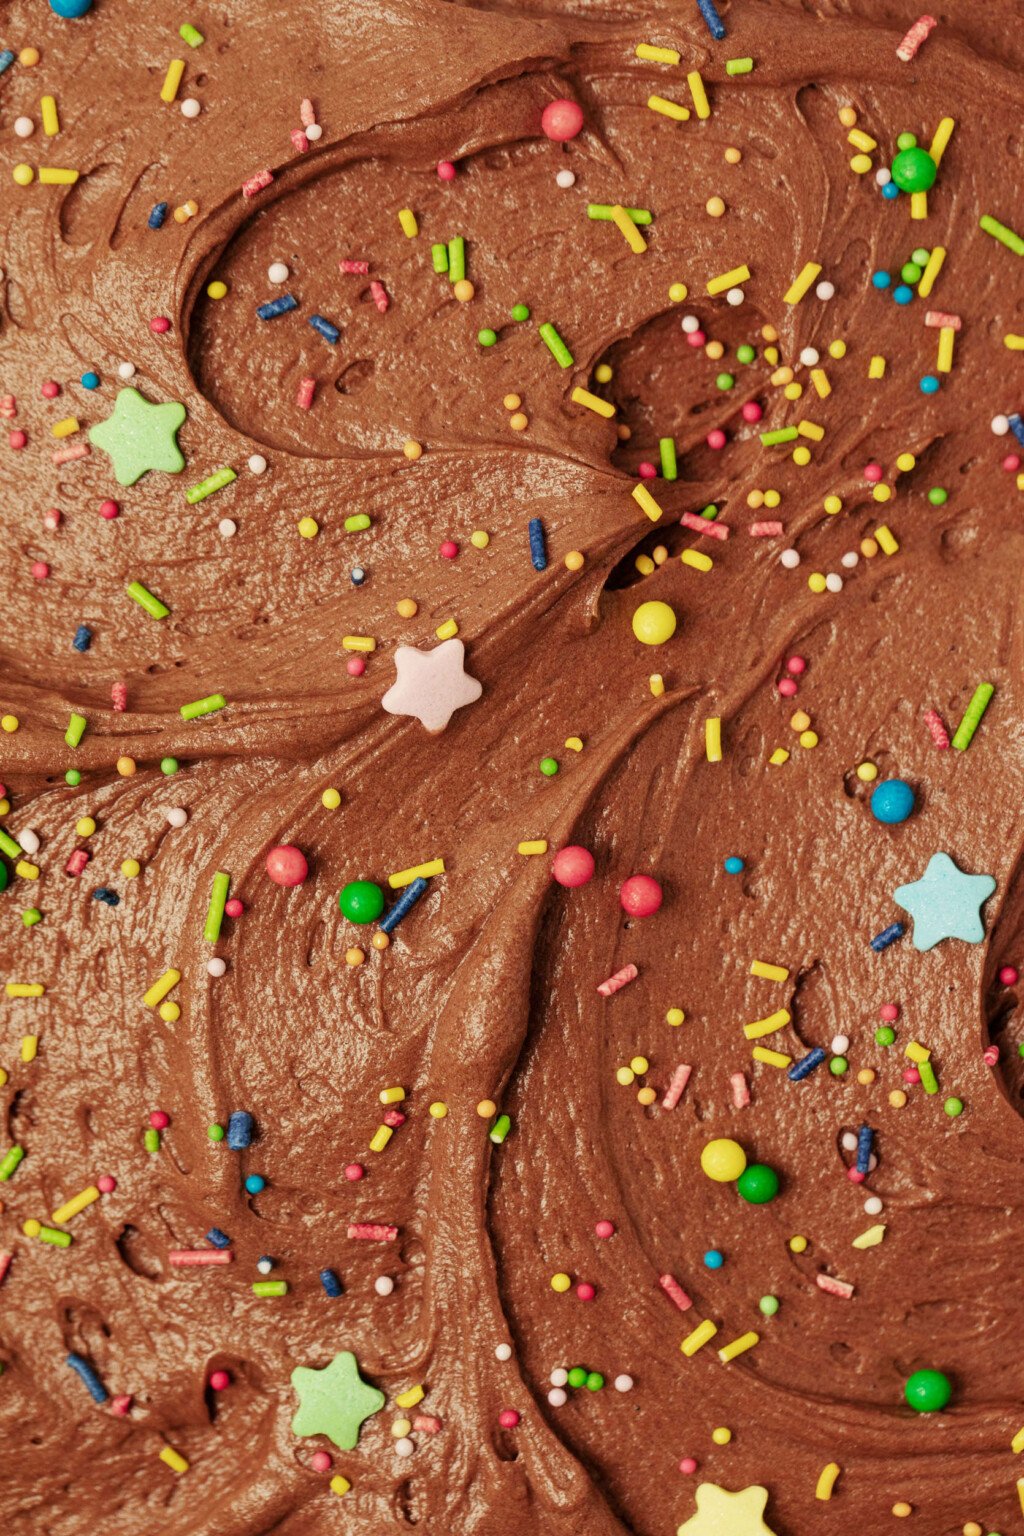 A close-up image of a swirl of chocolate buttercream and sprinkles, used to frost a cake.